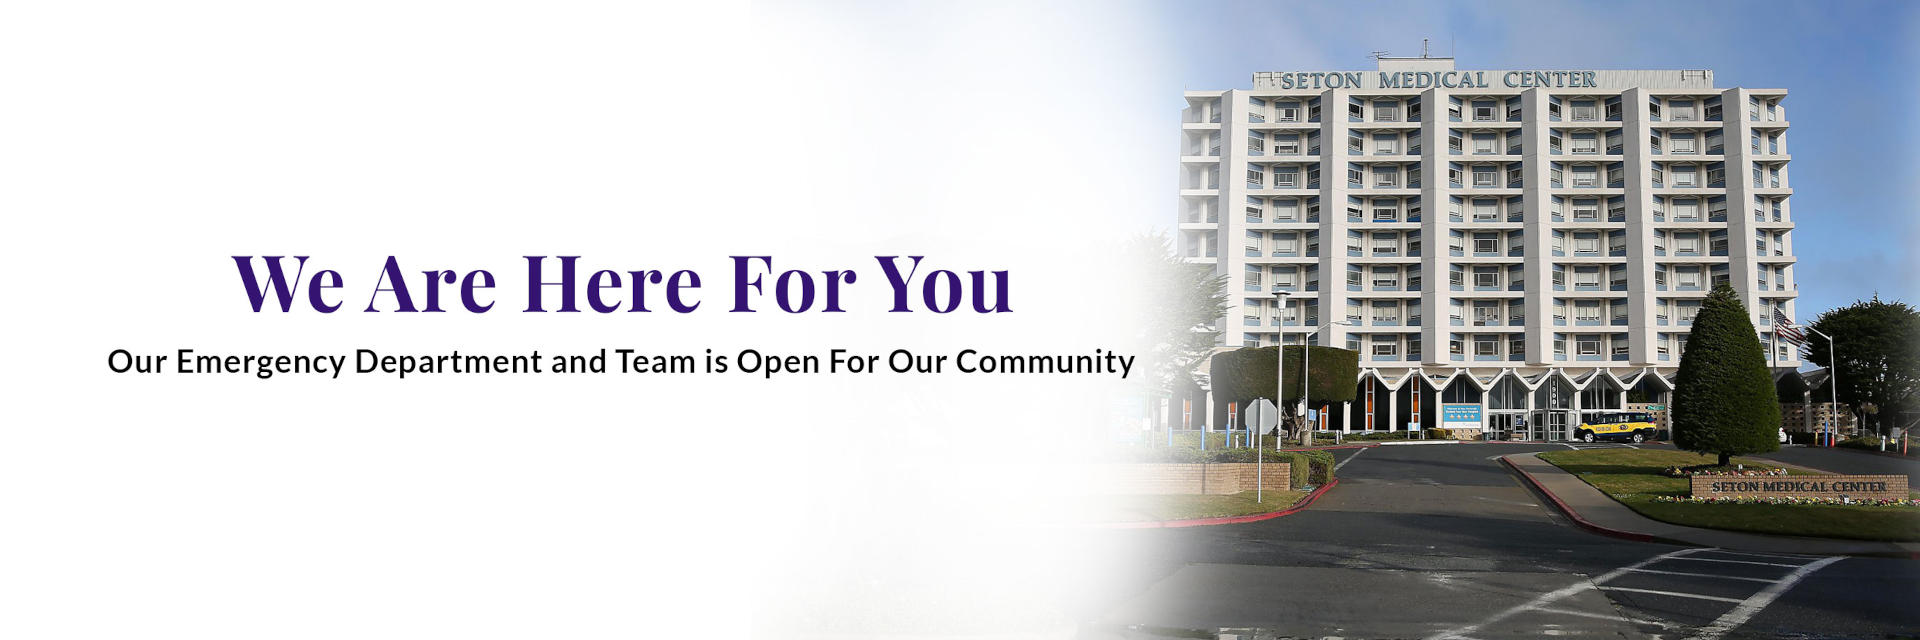 We Are Here For You
Our Emergency Department and Team is Open For Our Community